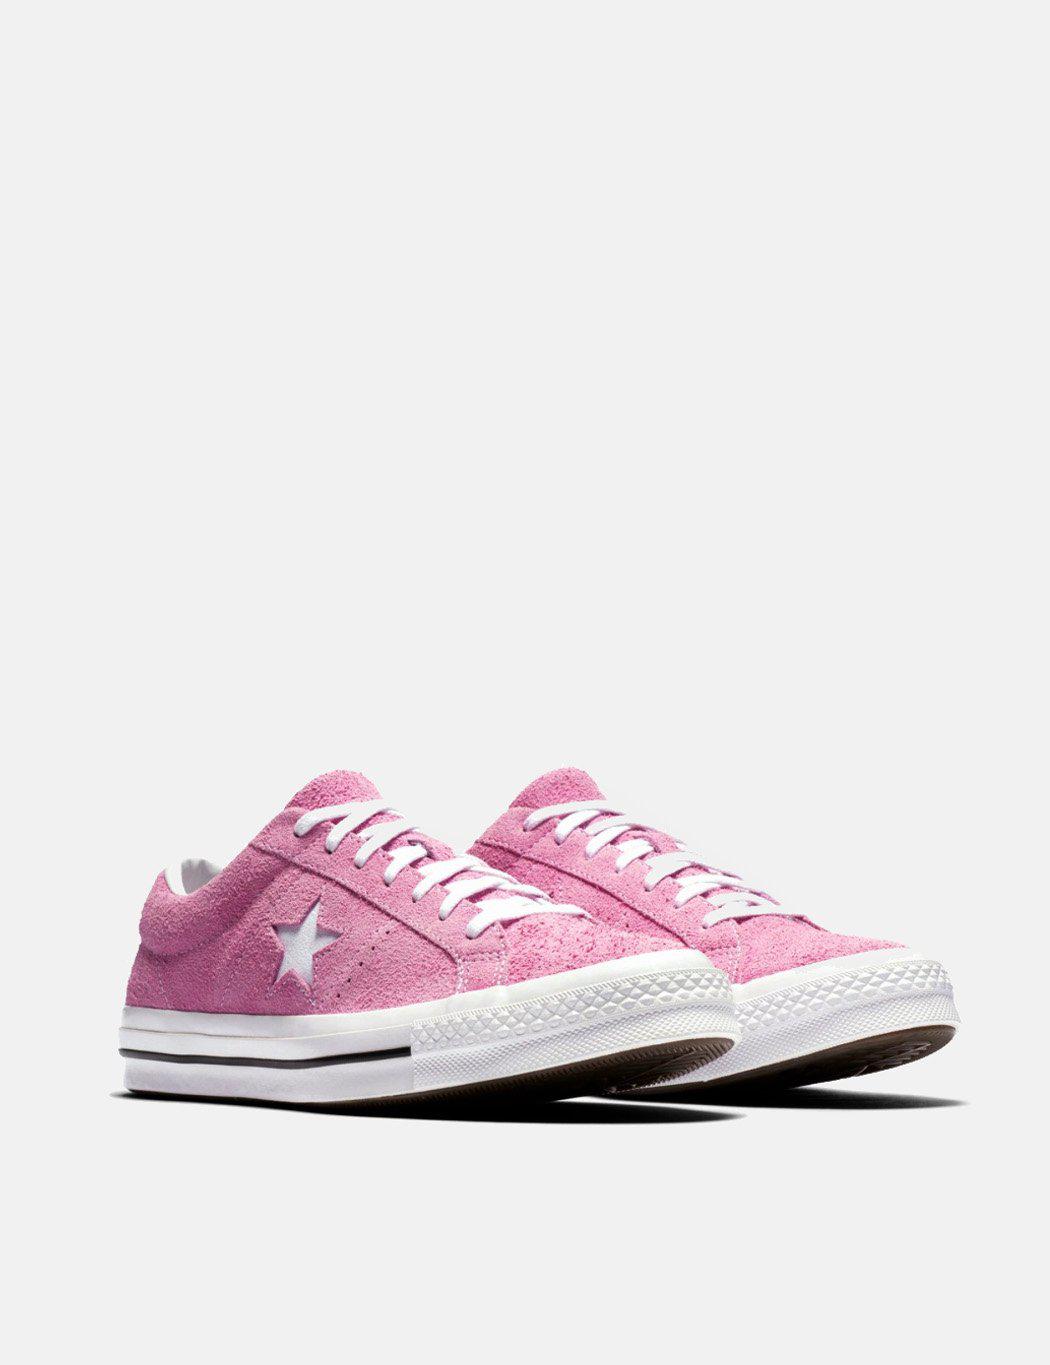 pink converse one star mens